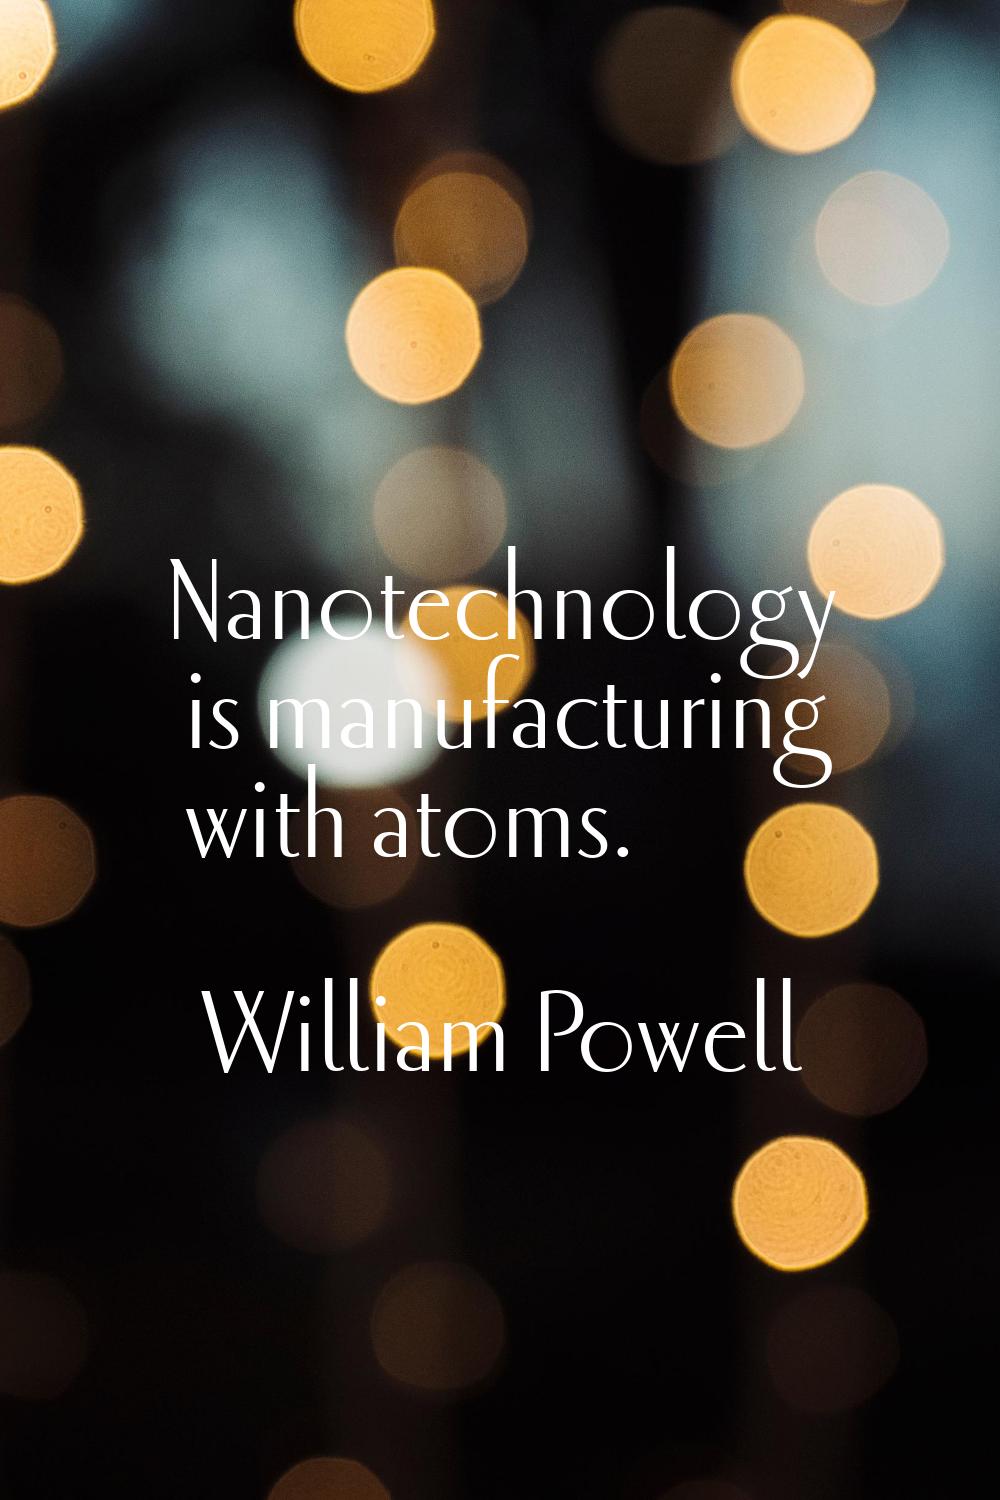 Nanotechnology is manufacturing with atoms.